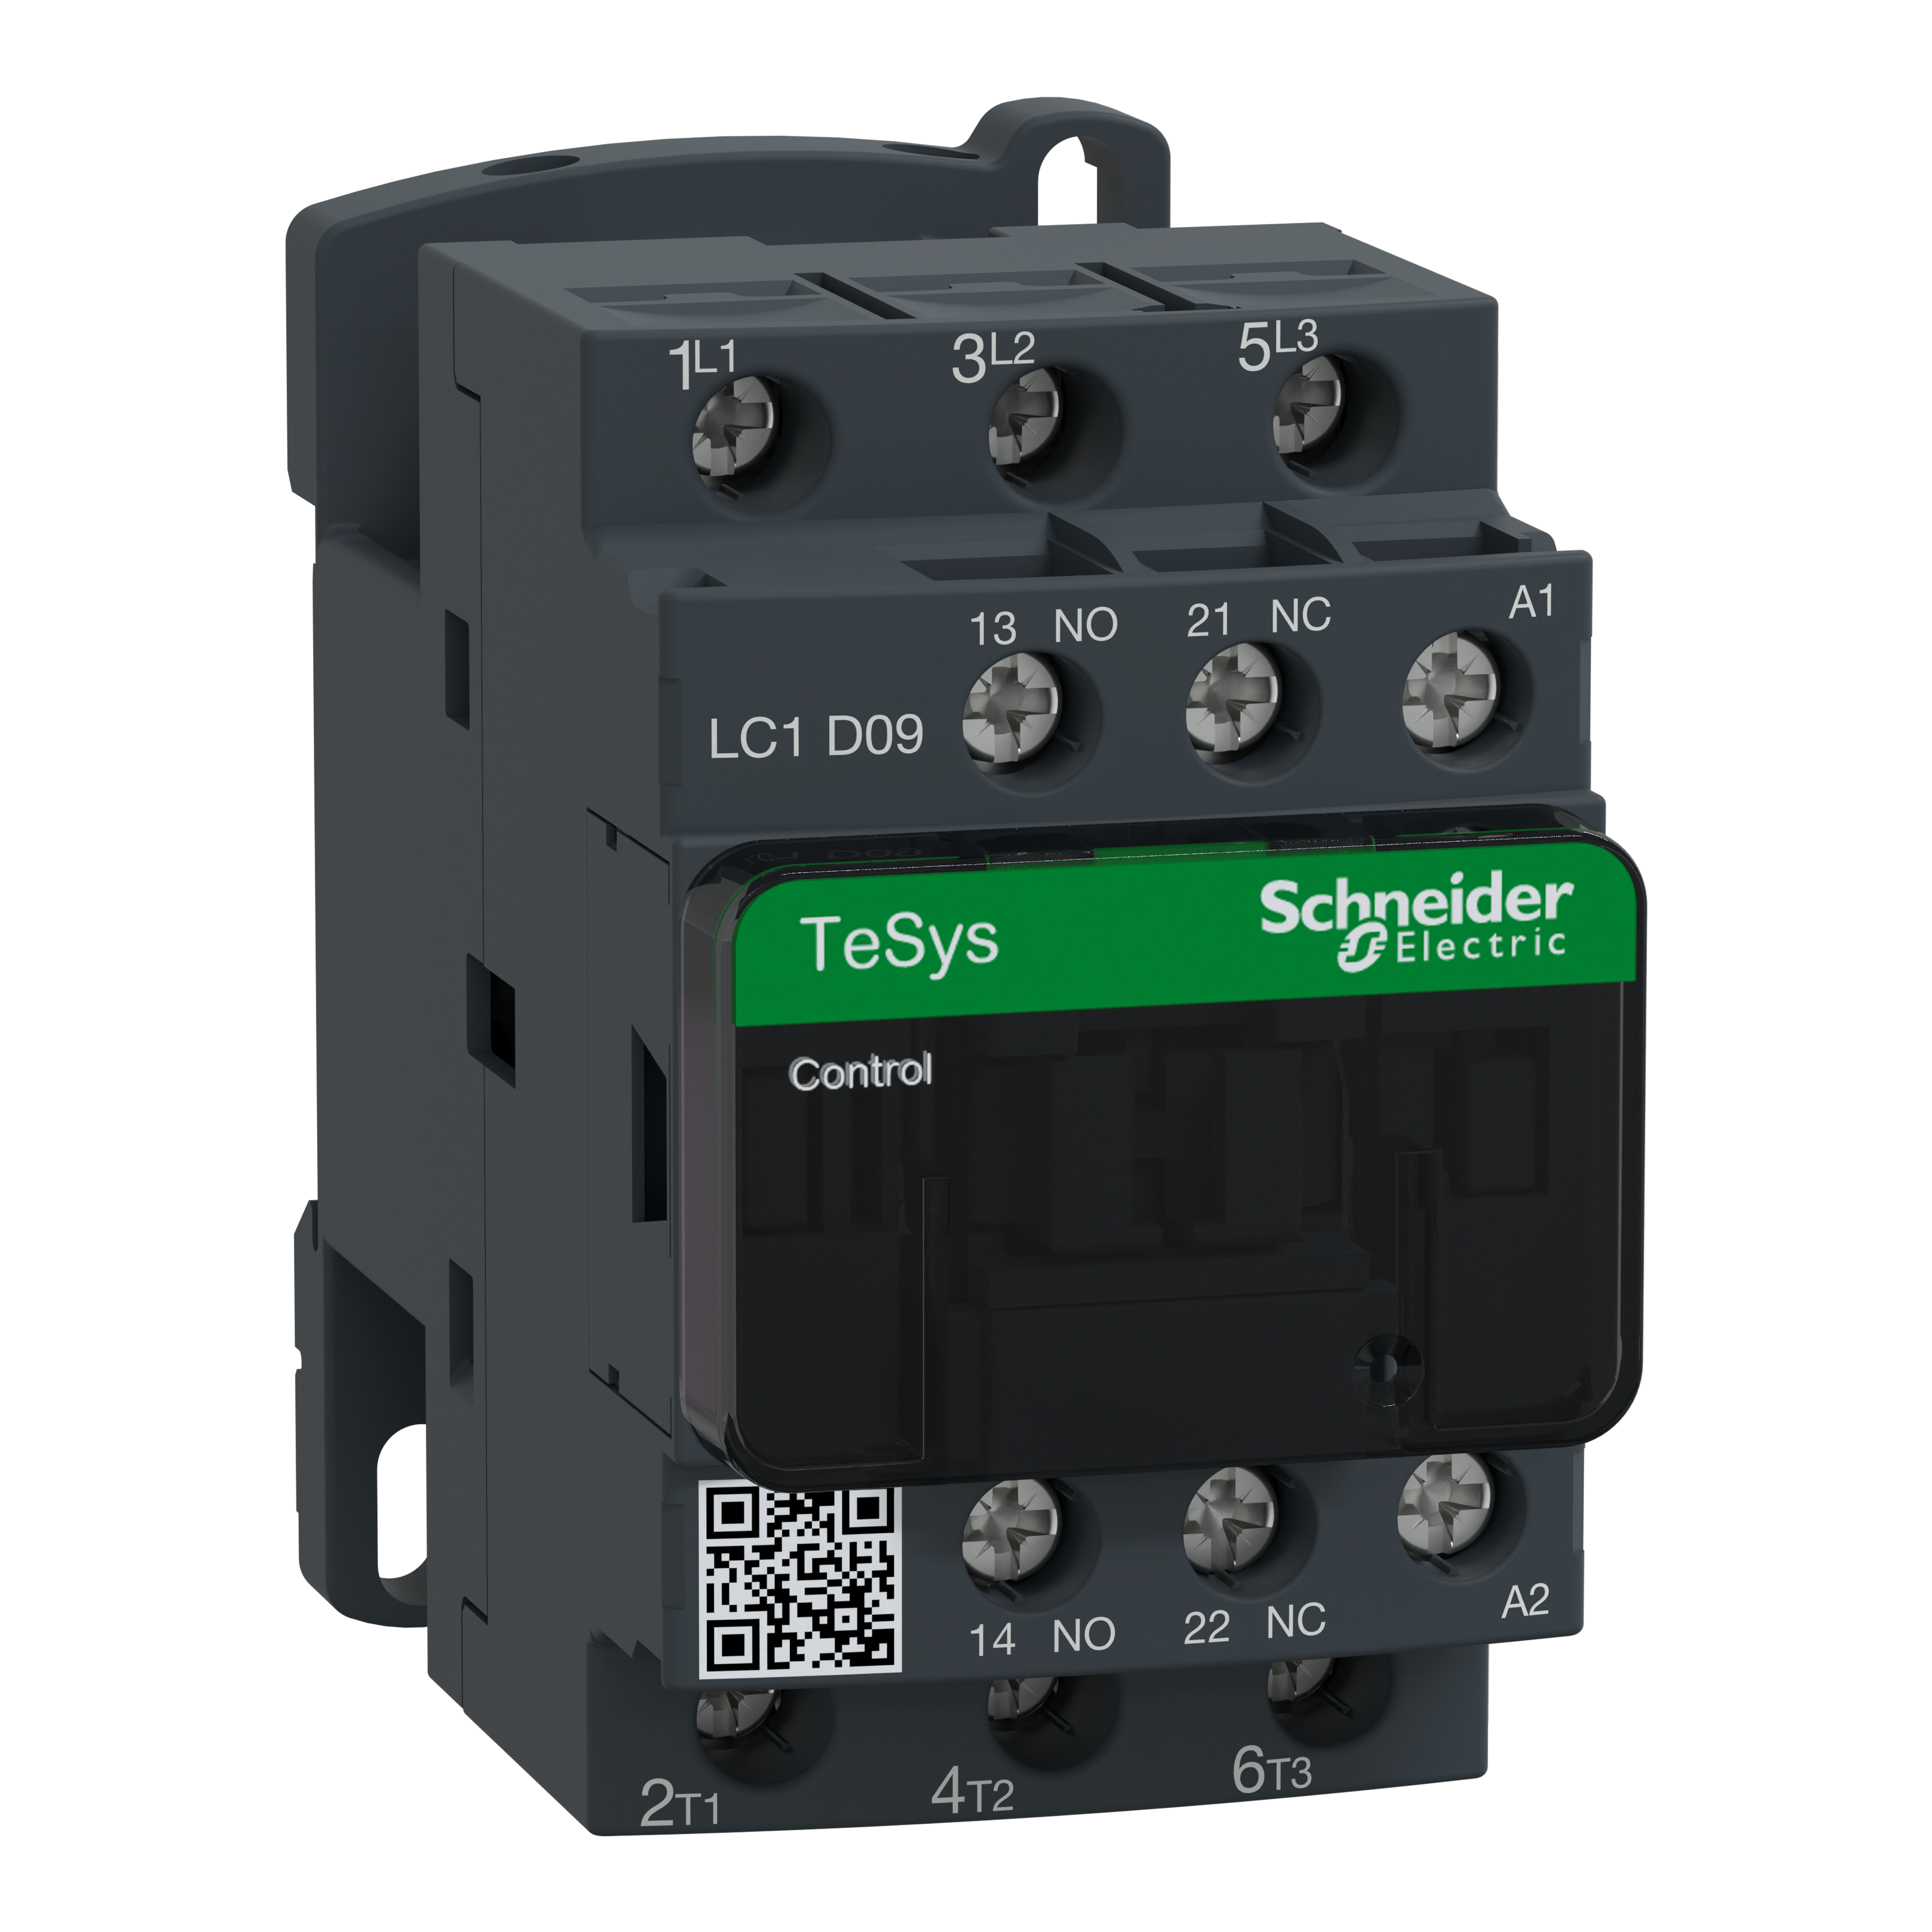 IEC contactor, TeSys Deca, nonreversing, 9A, 5HP at 480VAC, up to 100kA SCCR, 3 phase, 3 NO, 120VAC 50/60Hz coil, bulk pack